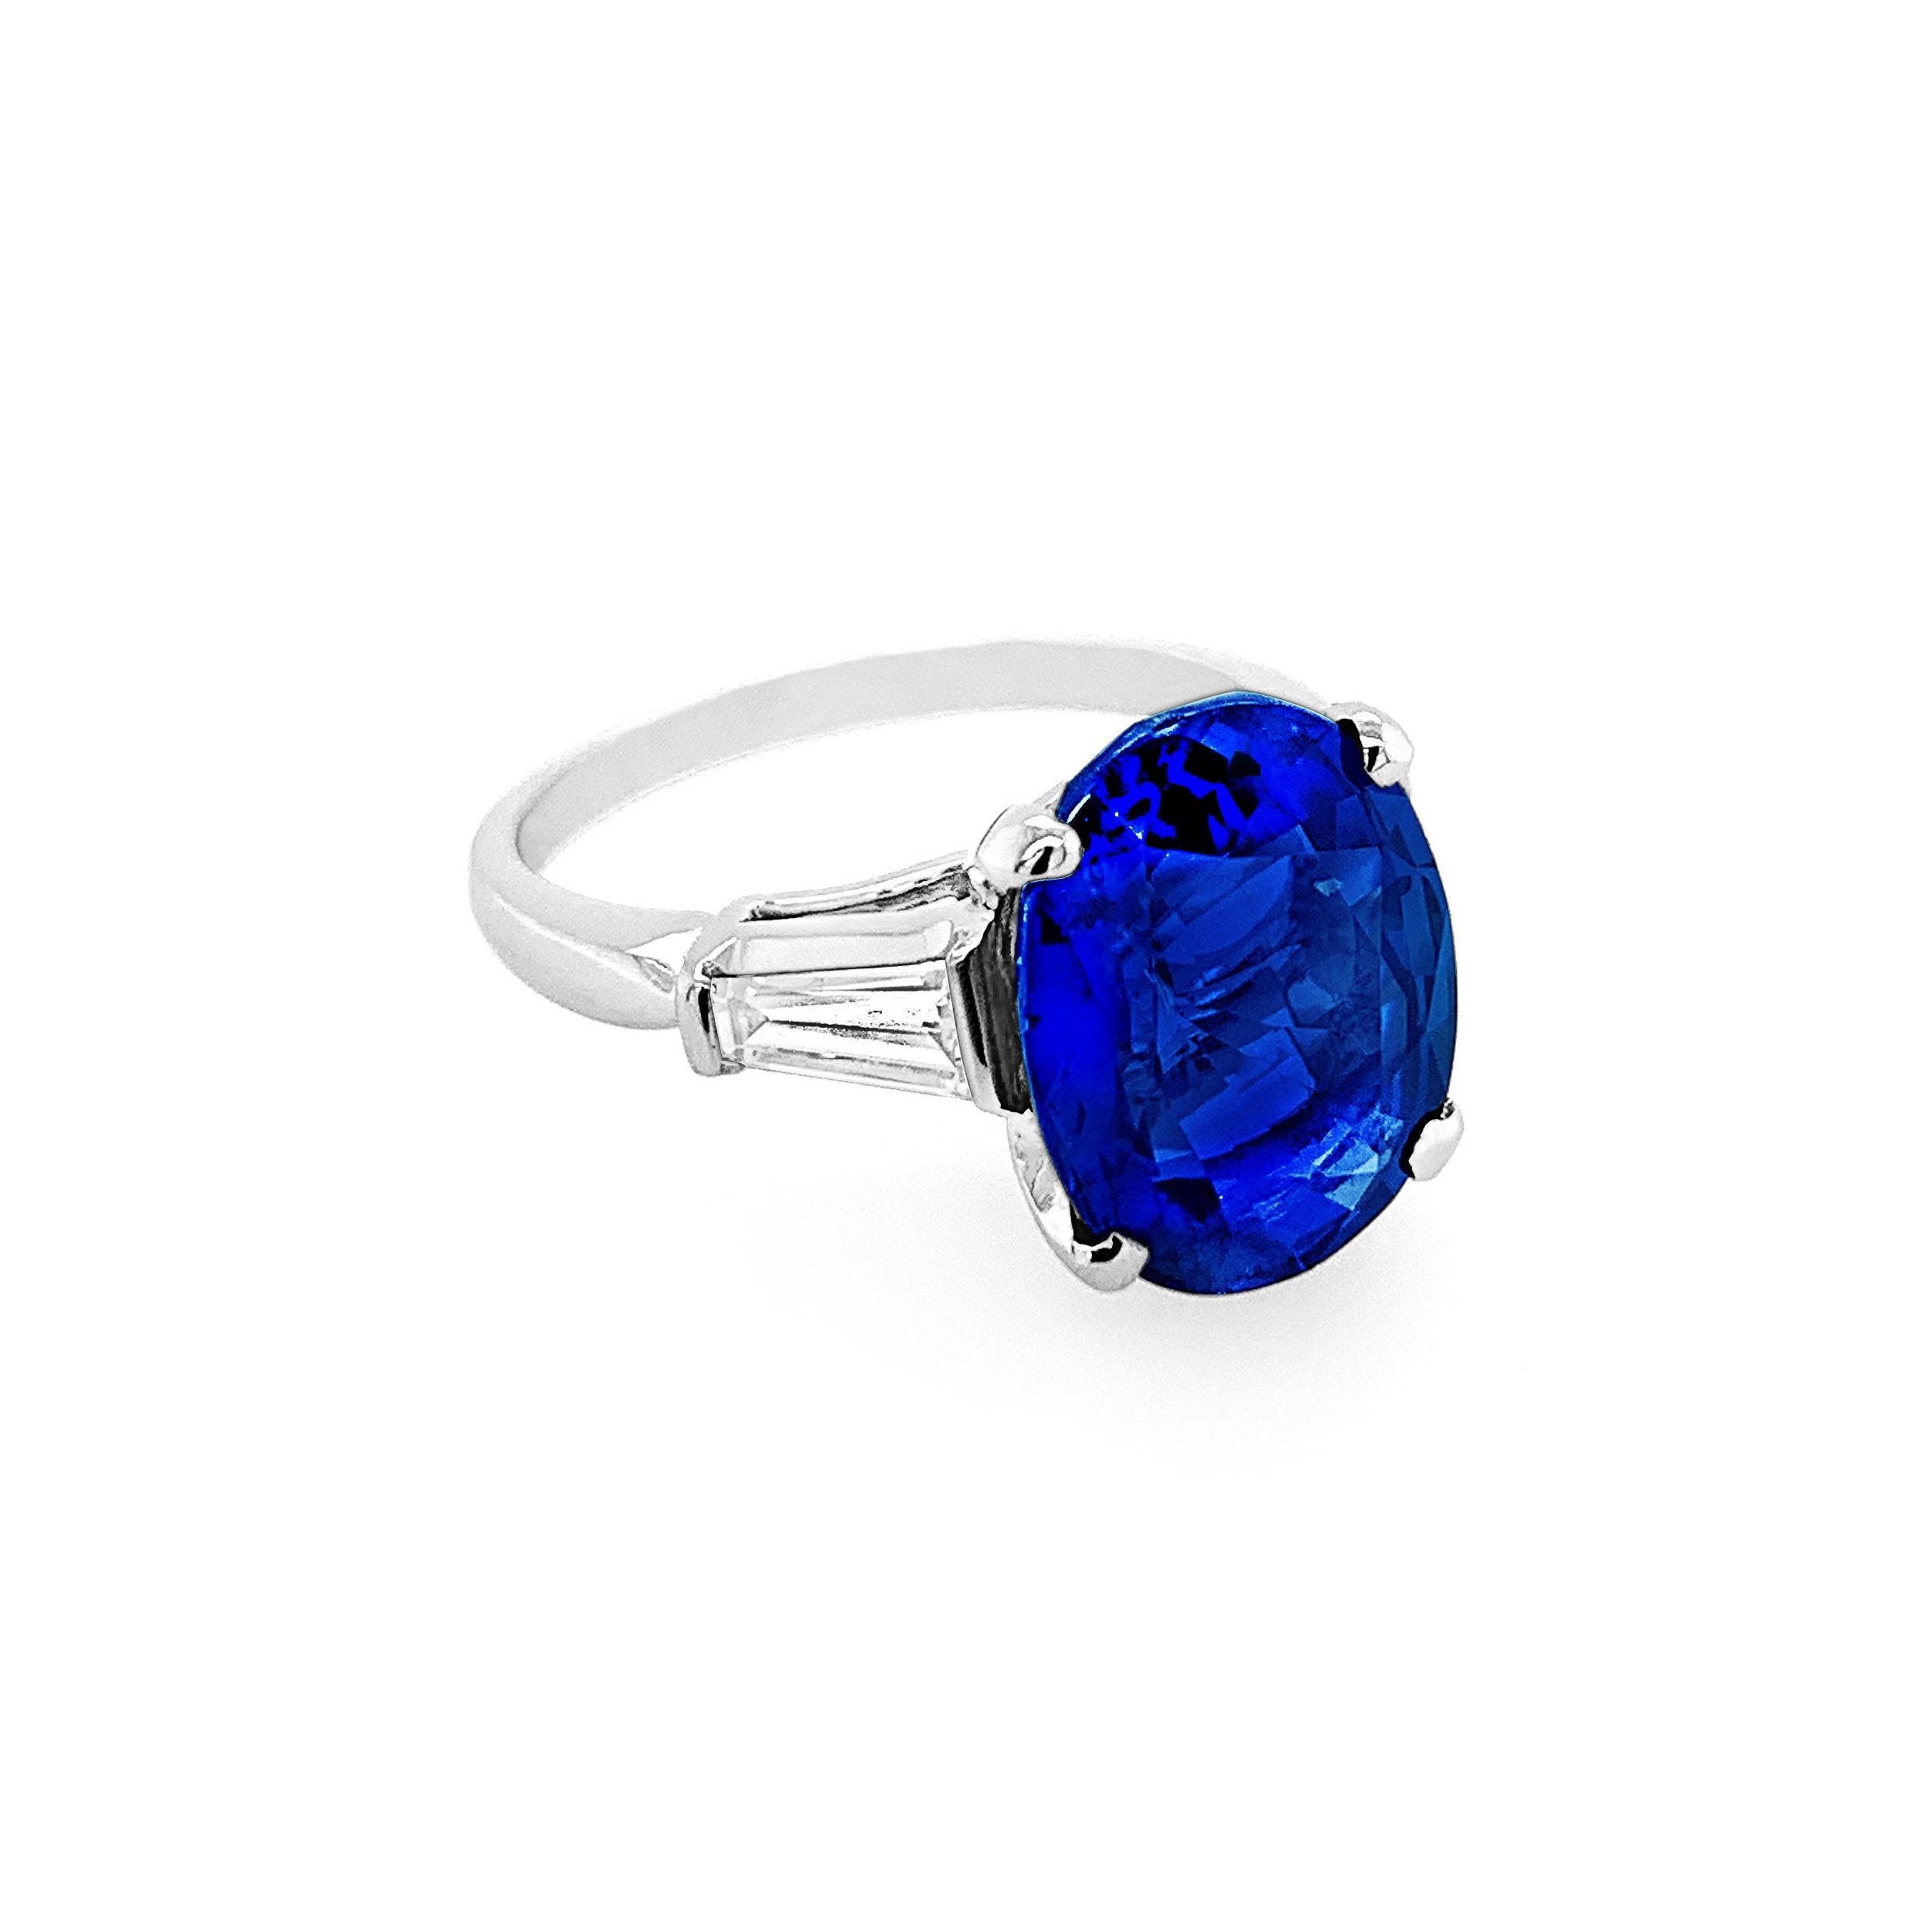 Oval Cut 6.04 Carat Oval Sapphire with Trapeze Side Diamonds in Platinum